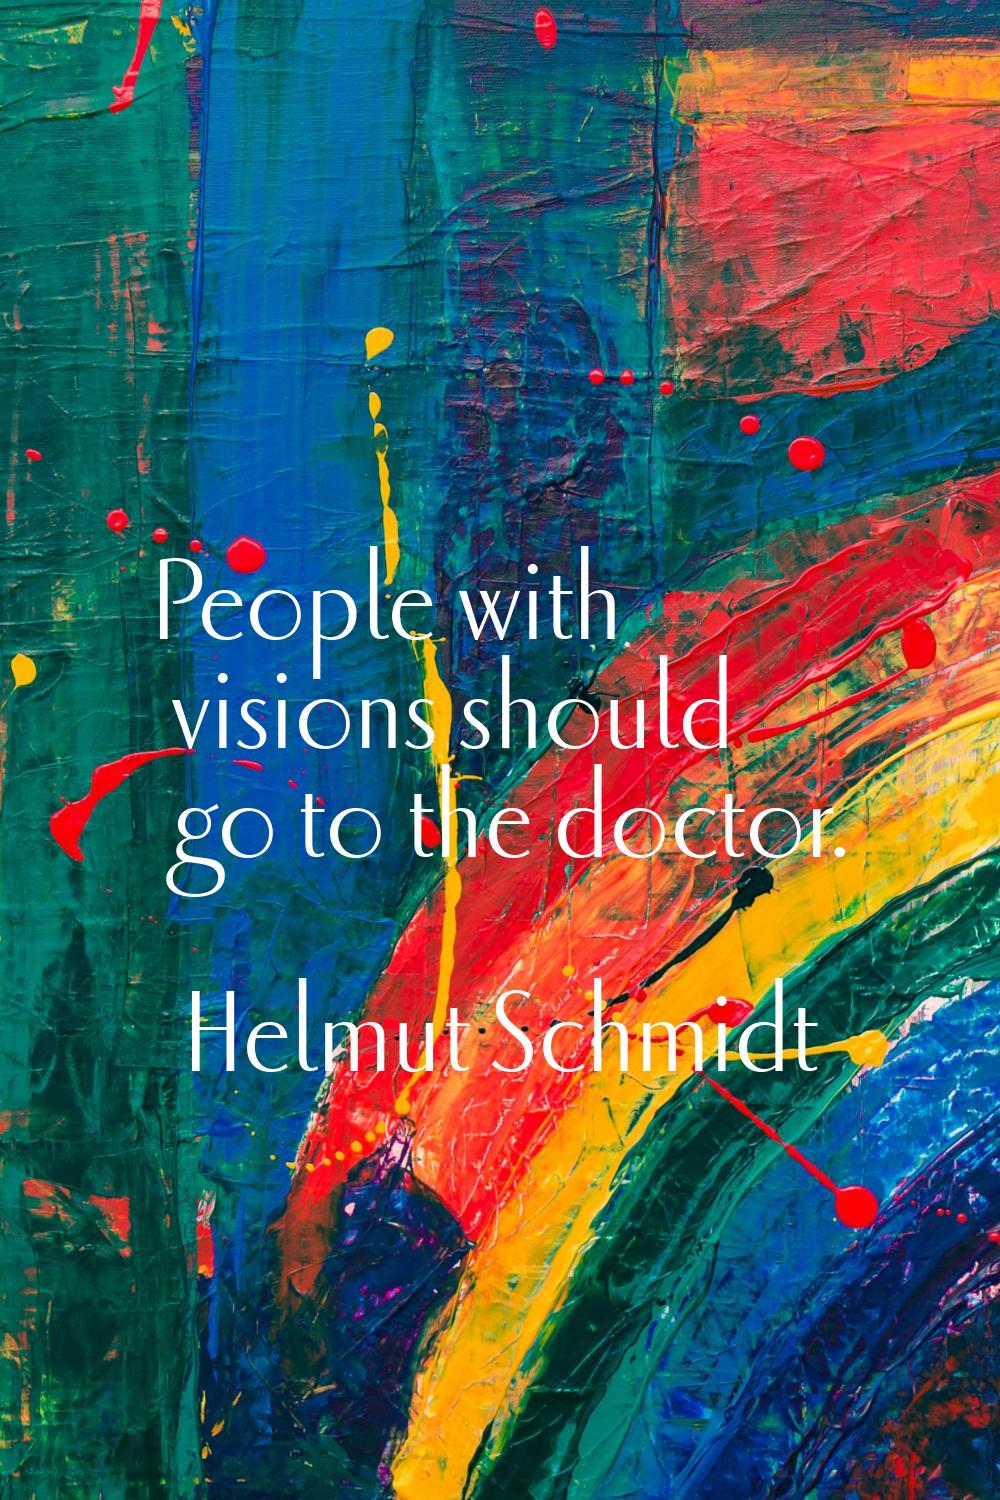 People with visions should go to the doctor.